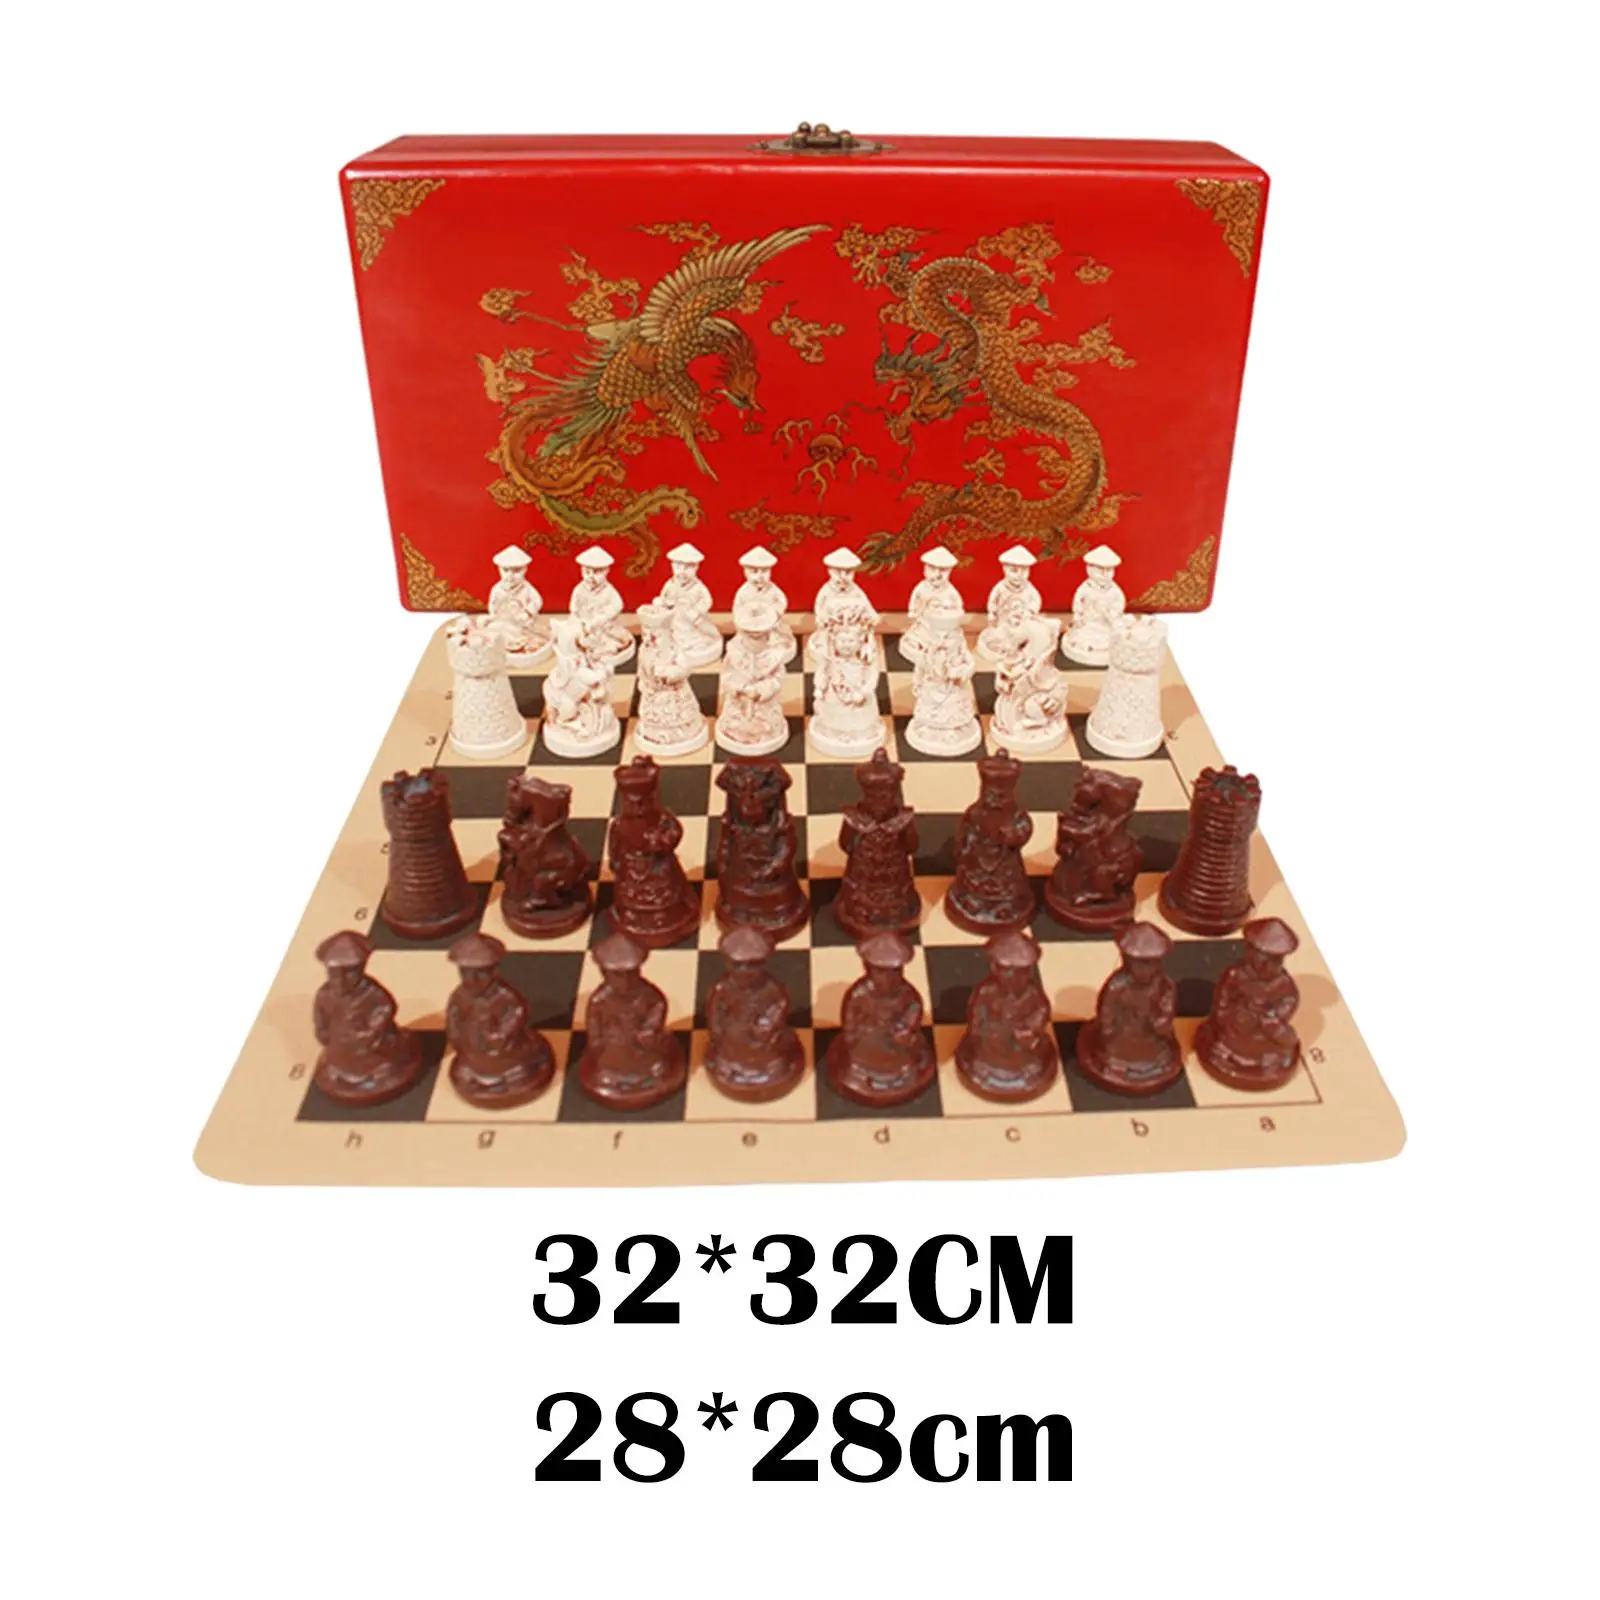 

Handmade International Chess Set Deluxe Chess Game Chess Pieces for Teens Adults Travel Entertainment Enjoy Leisure Time